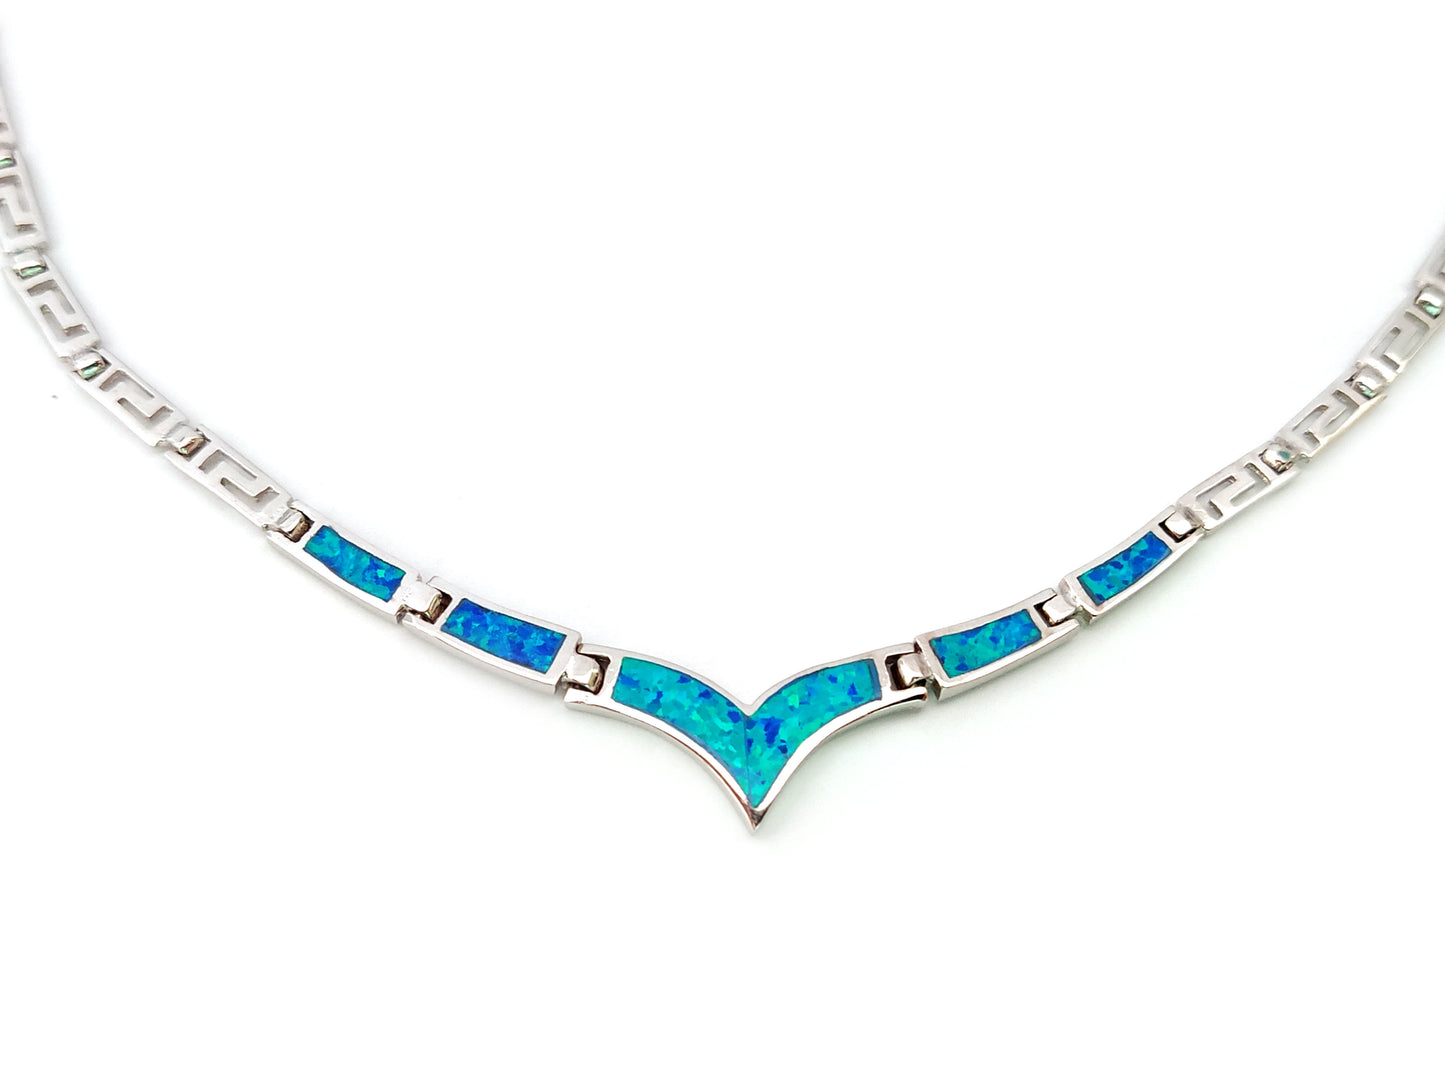 Greek key silver necklace with blue opal stones in v shape on white background.